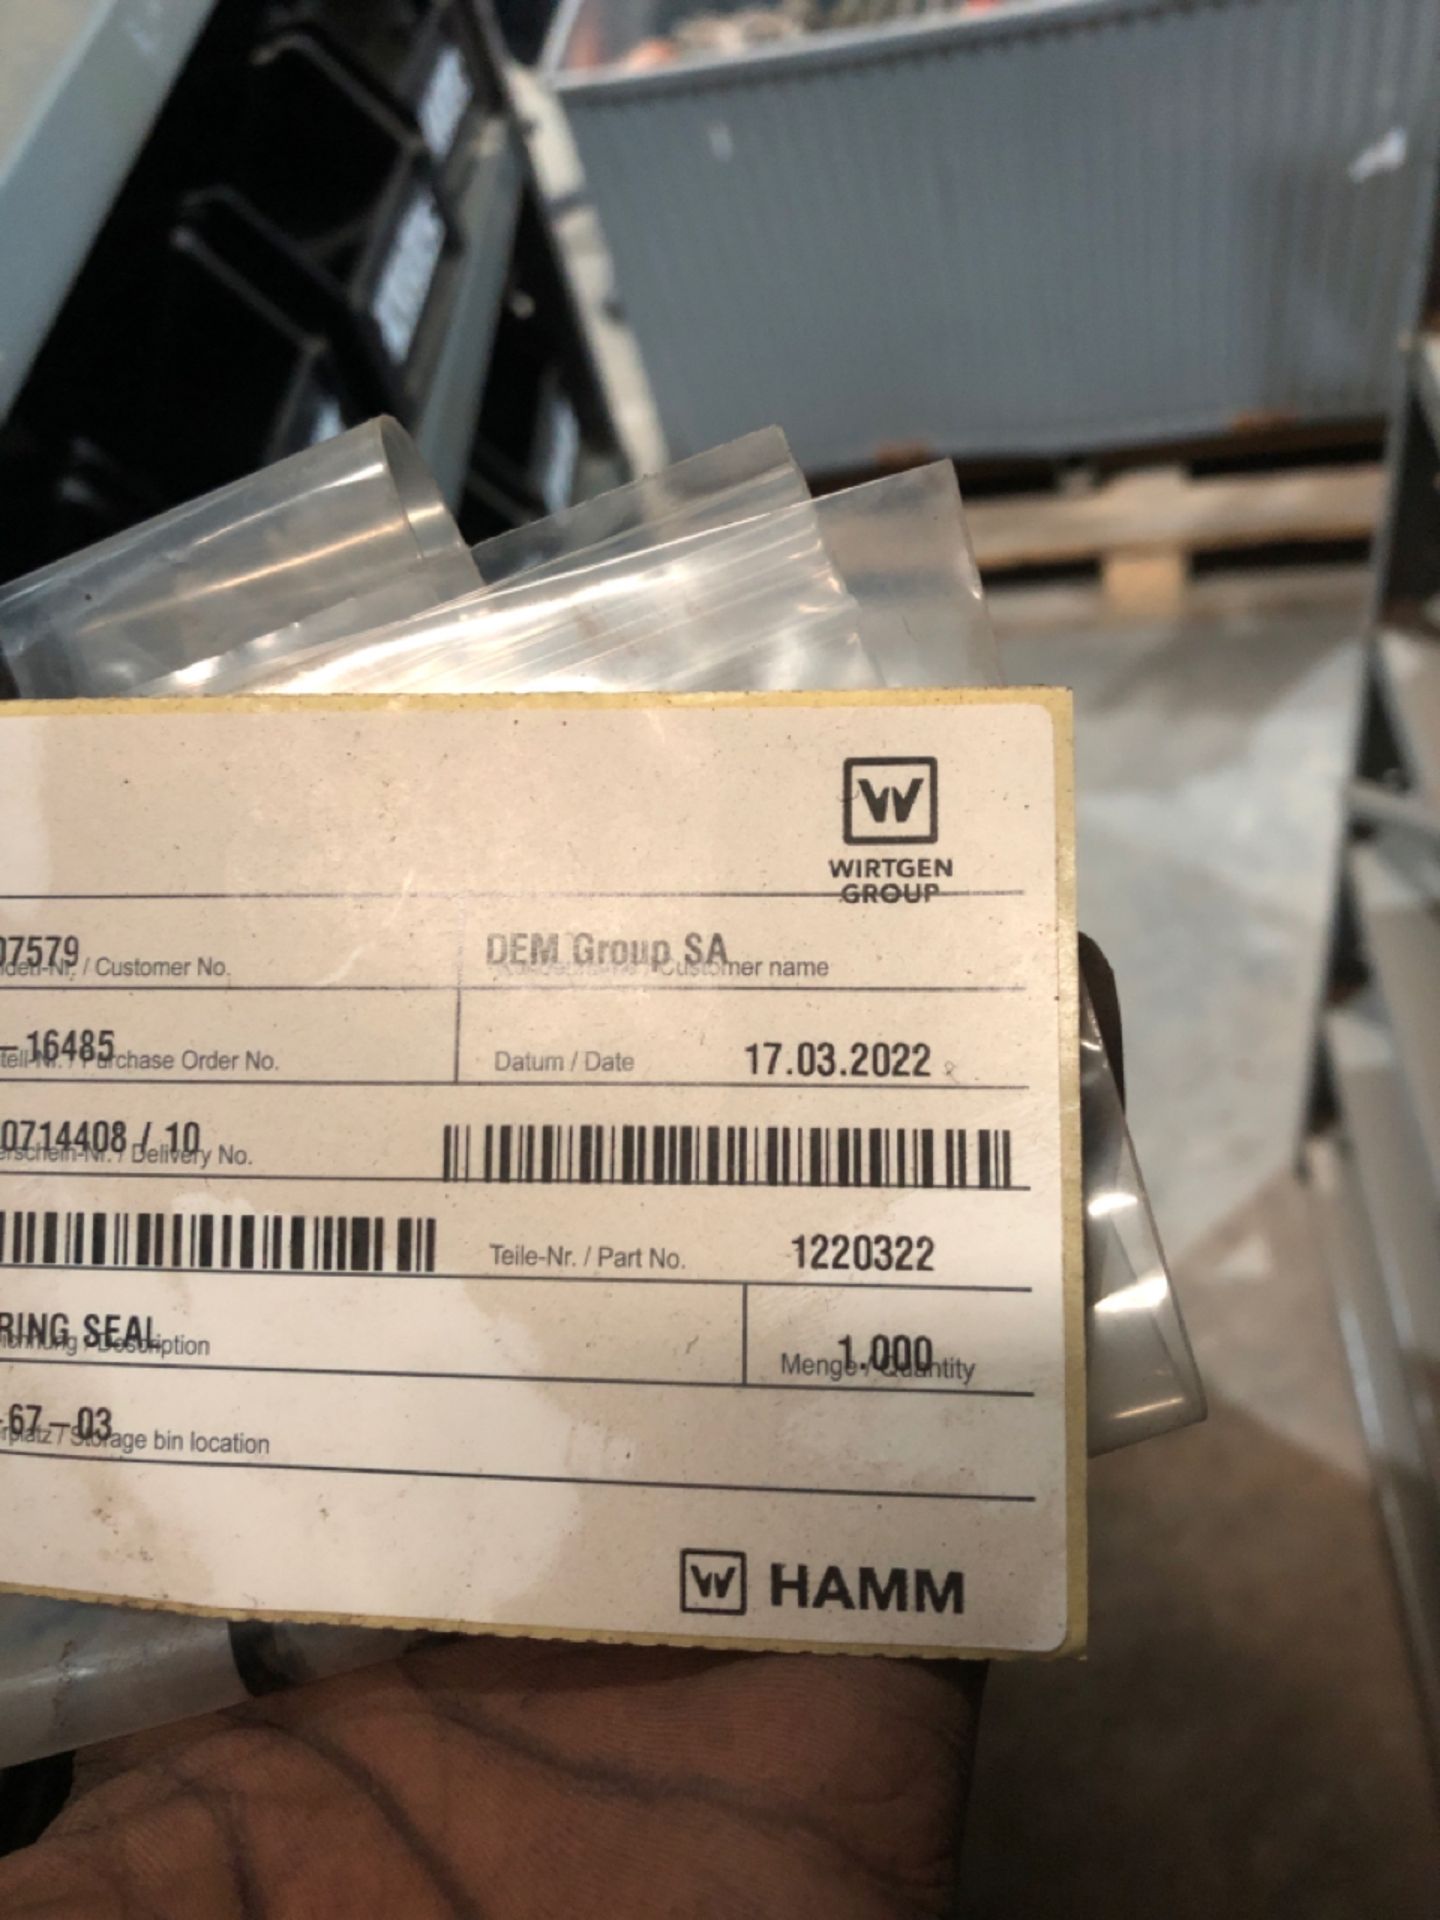 HAMM Spares - Image 81 of 98